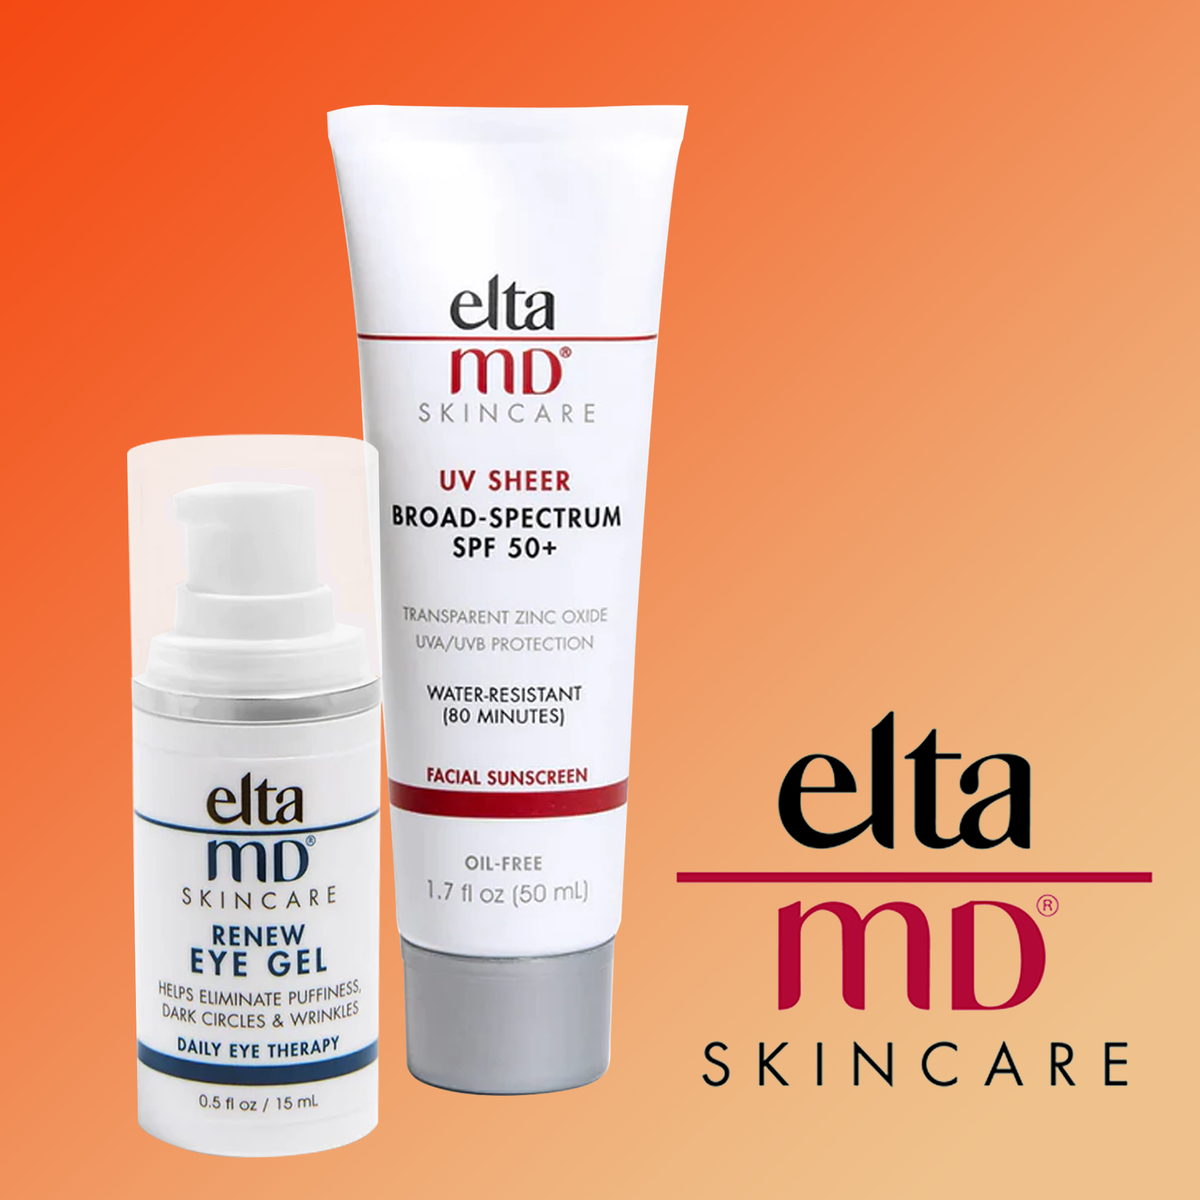 elta-md-skincare-square-img-no-dermatologist.png__PID:fab3bf74-eb28-4a0c-9ac6-1bc7cd79c06f